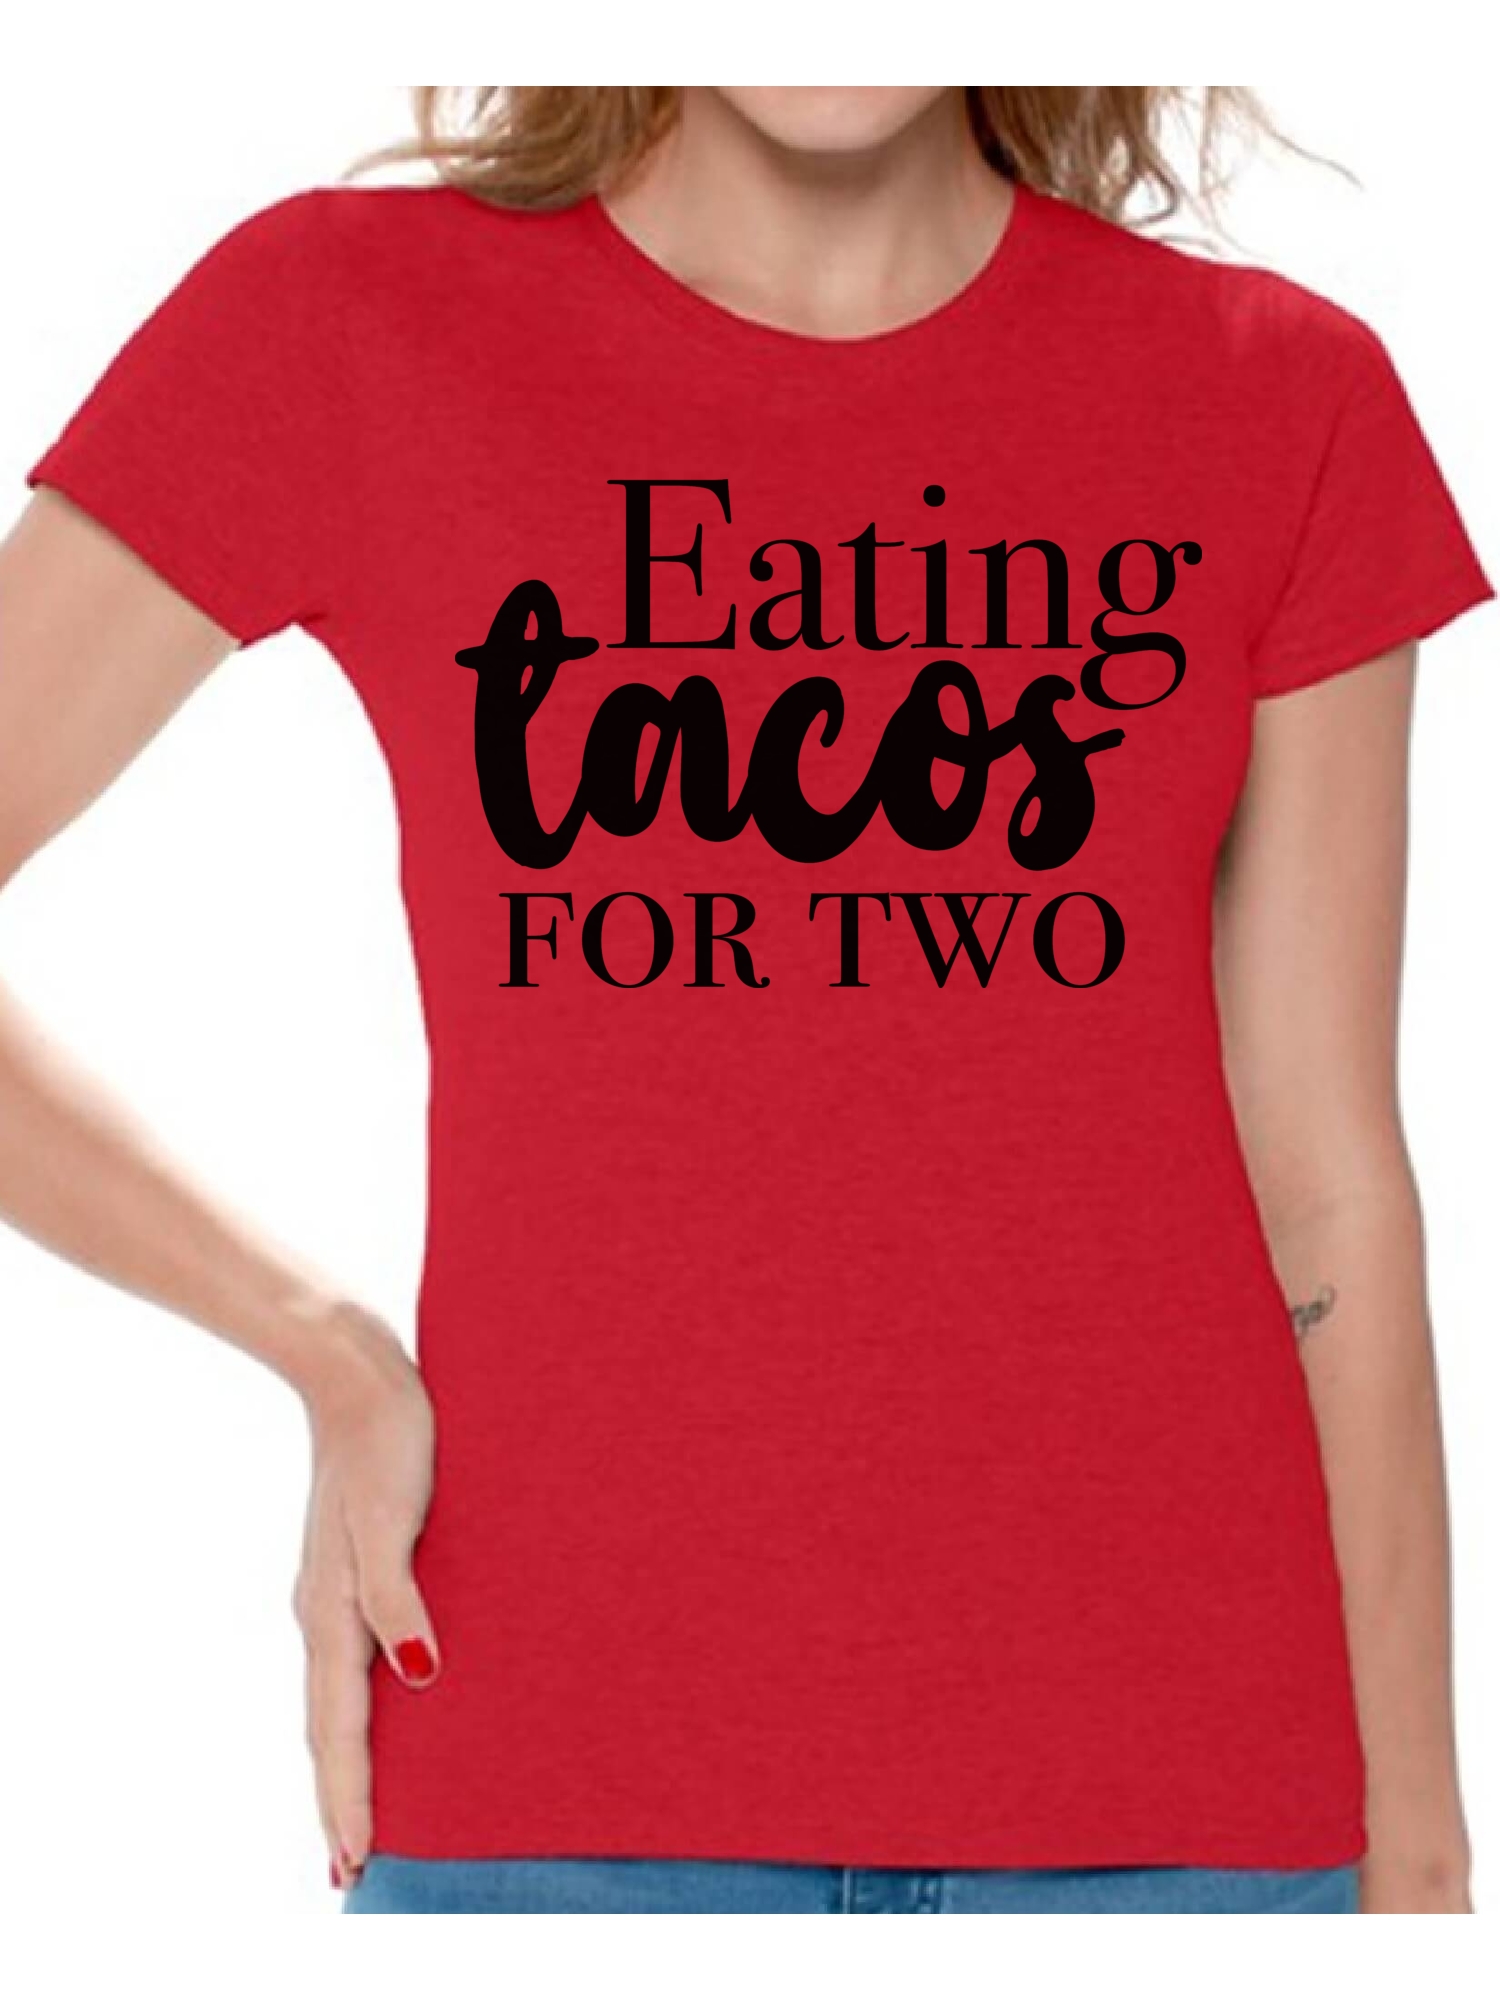 Awkward Styles Eating Tacos for Two Tshirt for Women I'm Pregnant Shirts Pregnancy Clothes for Ladies Womens Pregnancy Announcement T-Shirt for Ladies Pregnancy T-Shirt for Her Pregnancy Reveal Shirt - image 1 of 4